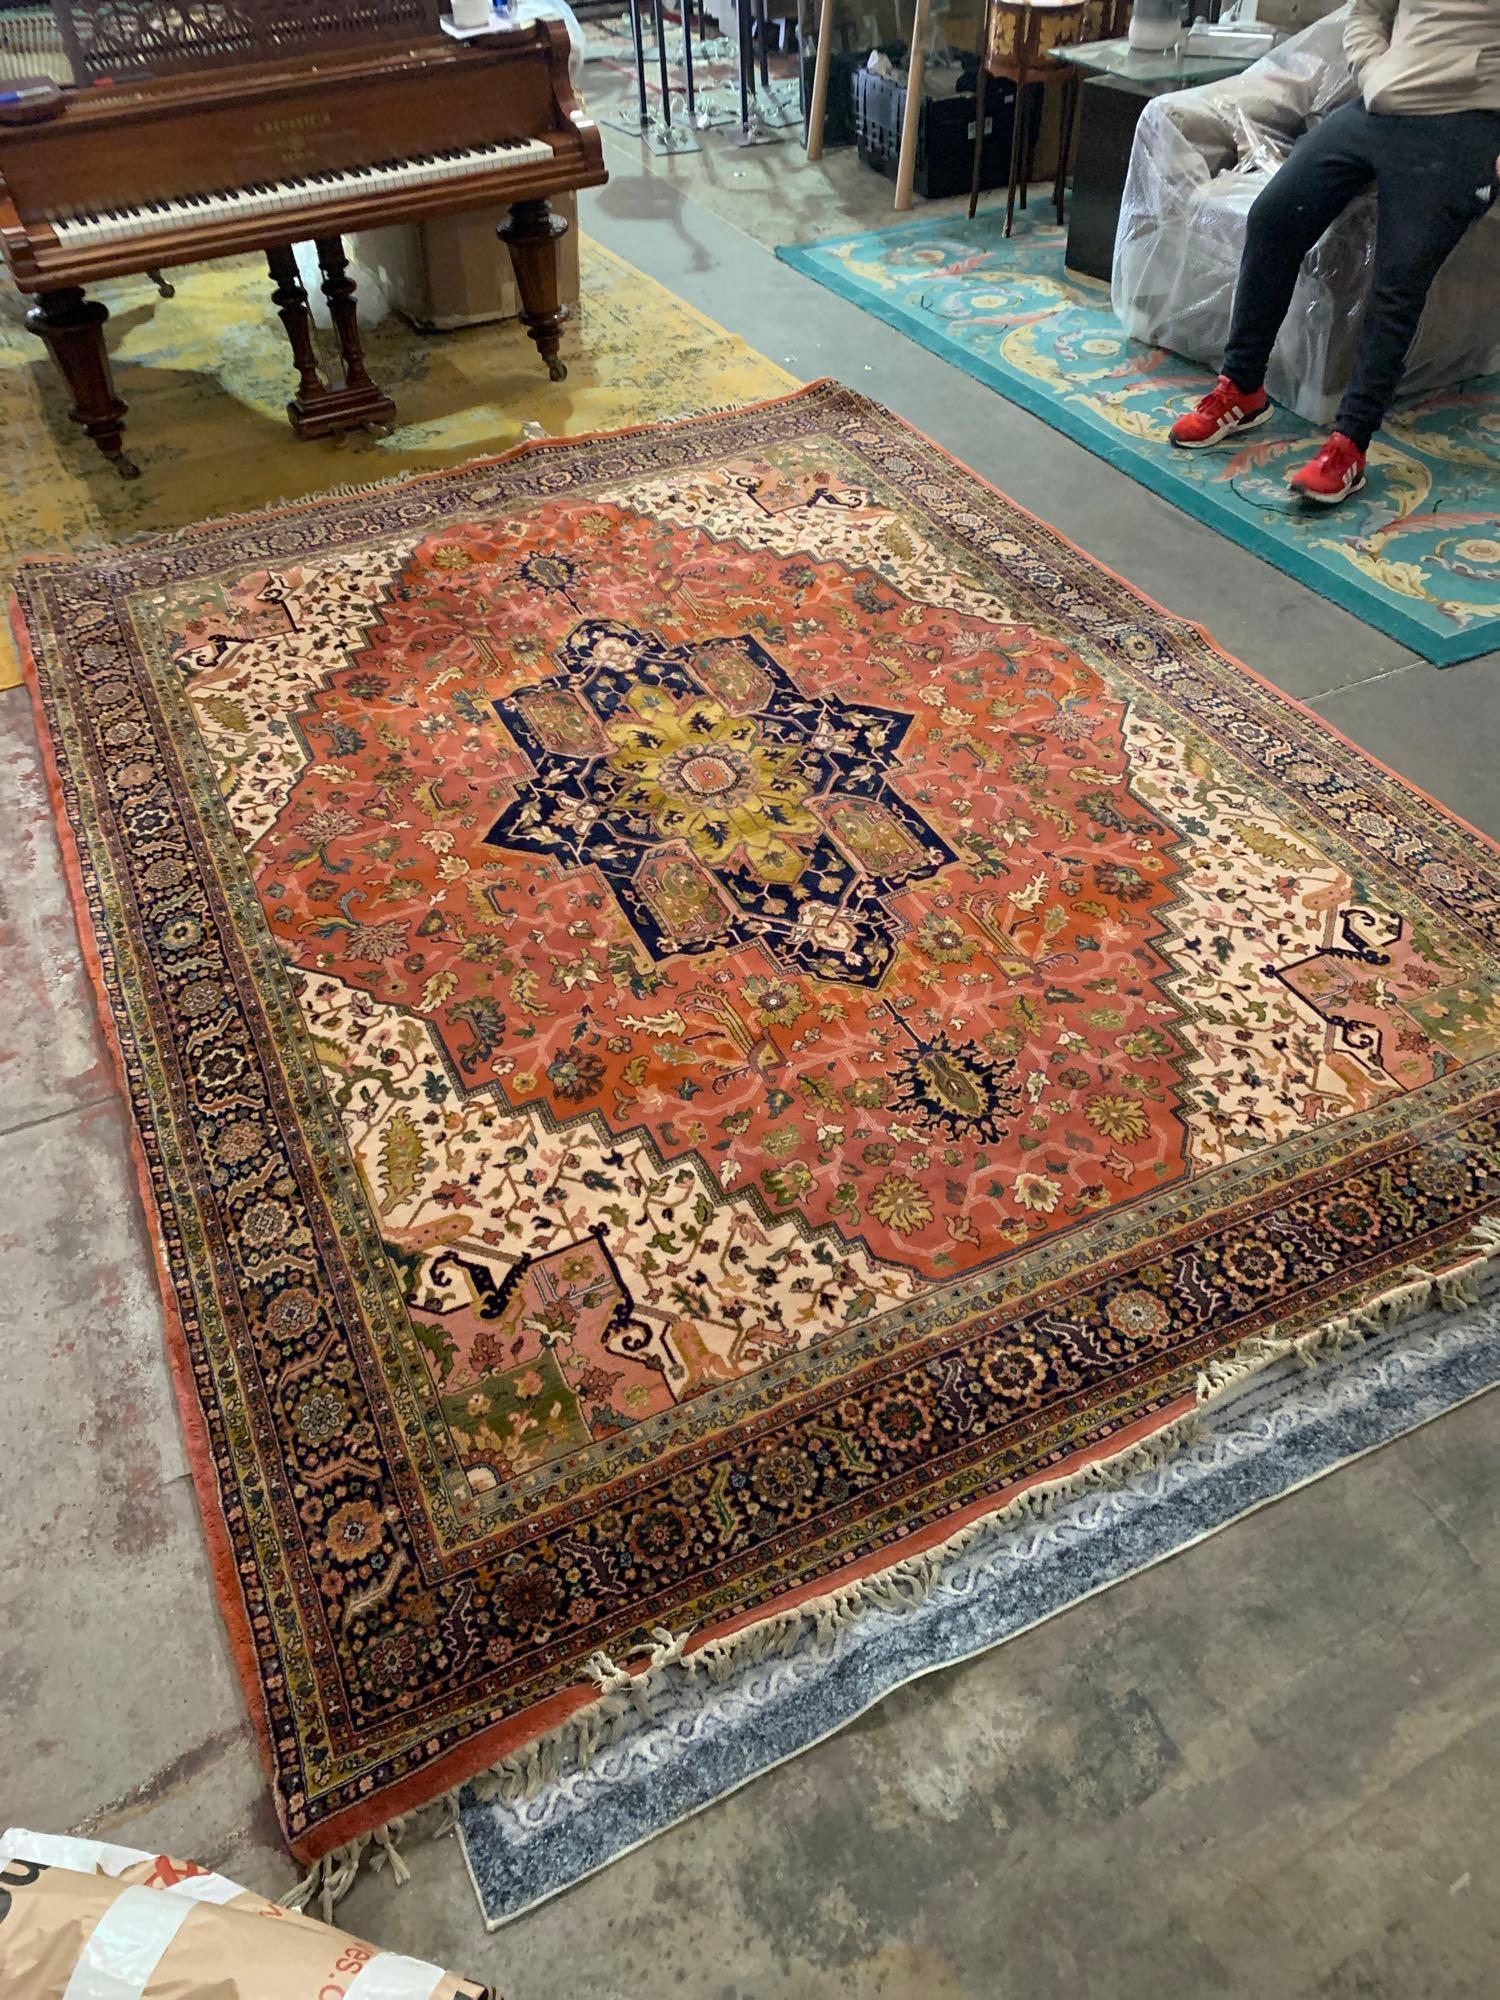 Jaipur Carpet, Rajhastan, North India, Wool On Cotton Foundation. With A Persian 'Heriz' Design, The